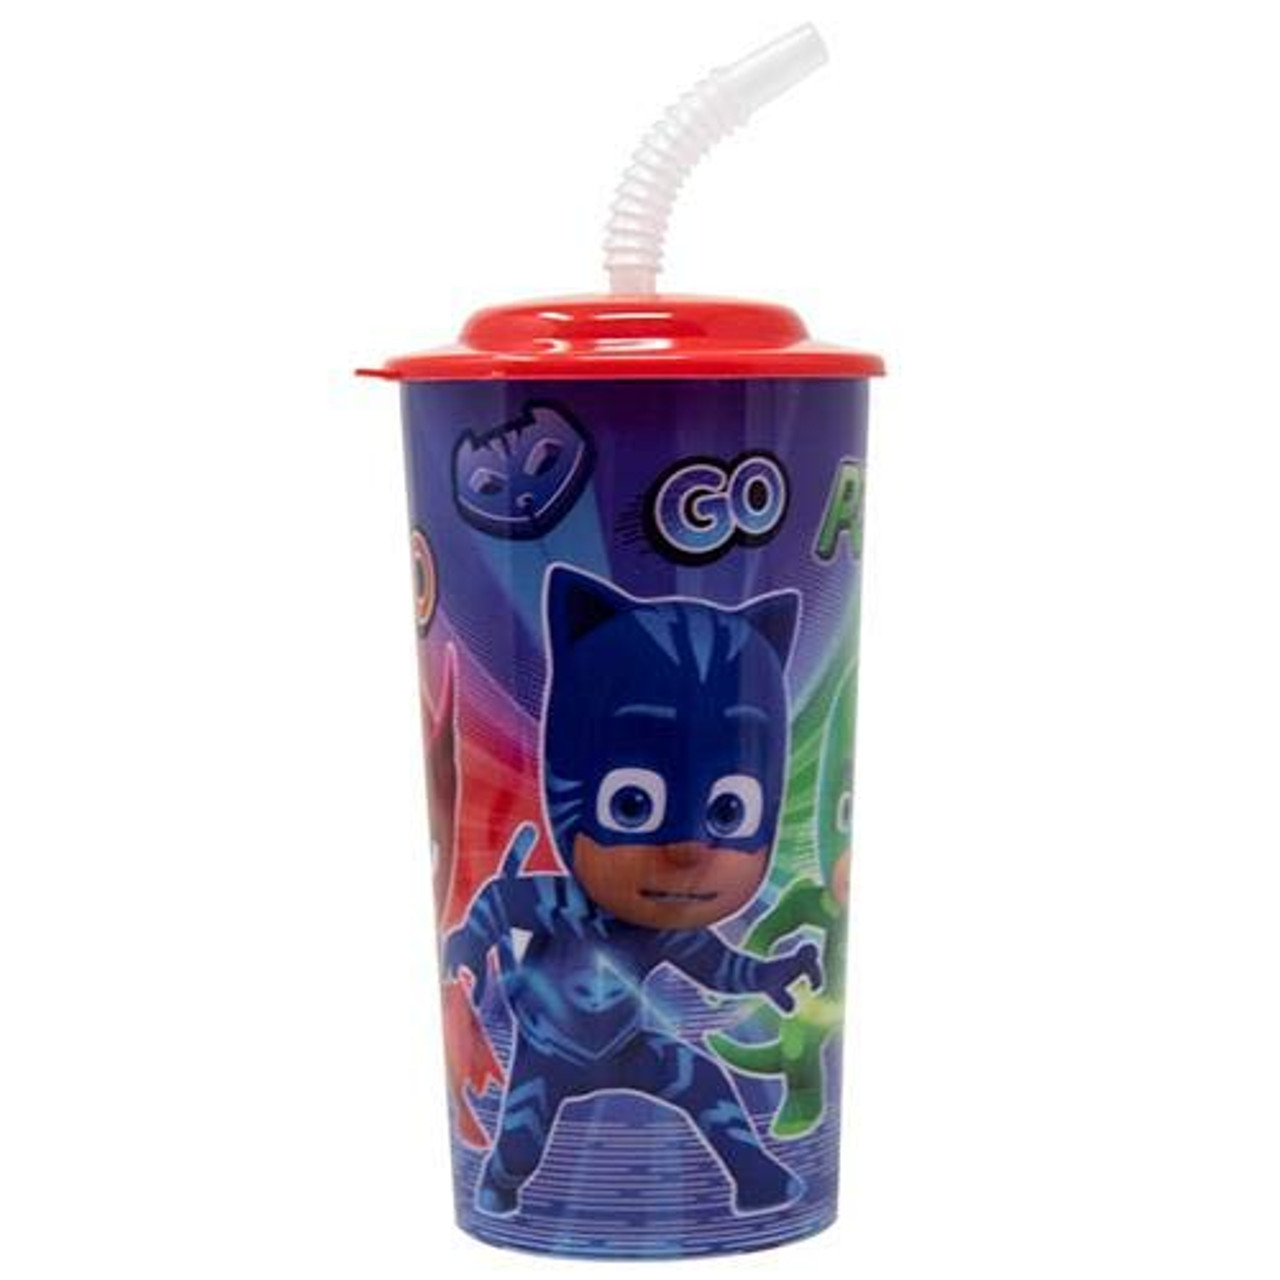 https://cdn11.bigcommerce.com/s-mhr53lwccw/images/stencil/1280x1280/products/716/8102/pj-masks-themed-drink-tumbler-with-lid-straw-16-oz__98325.1663975408.jpg?c=1?imbypass=on